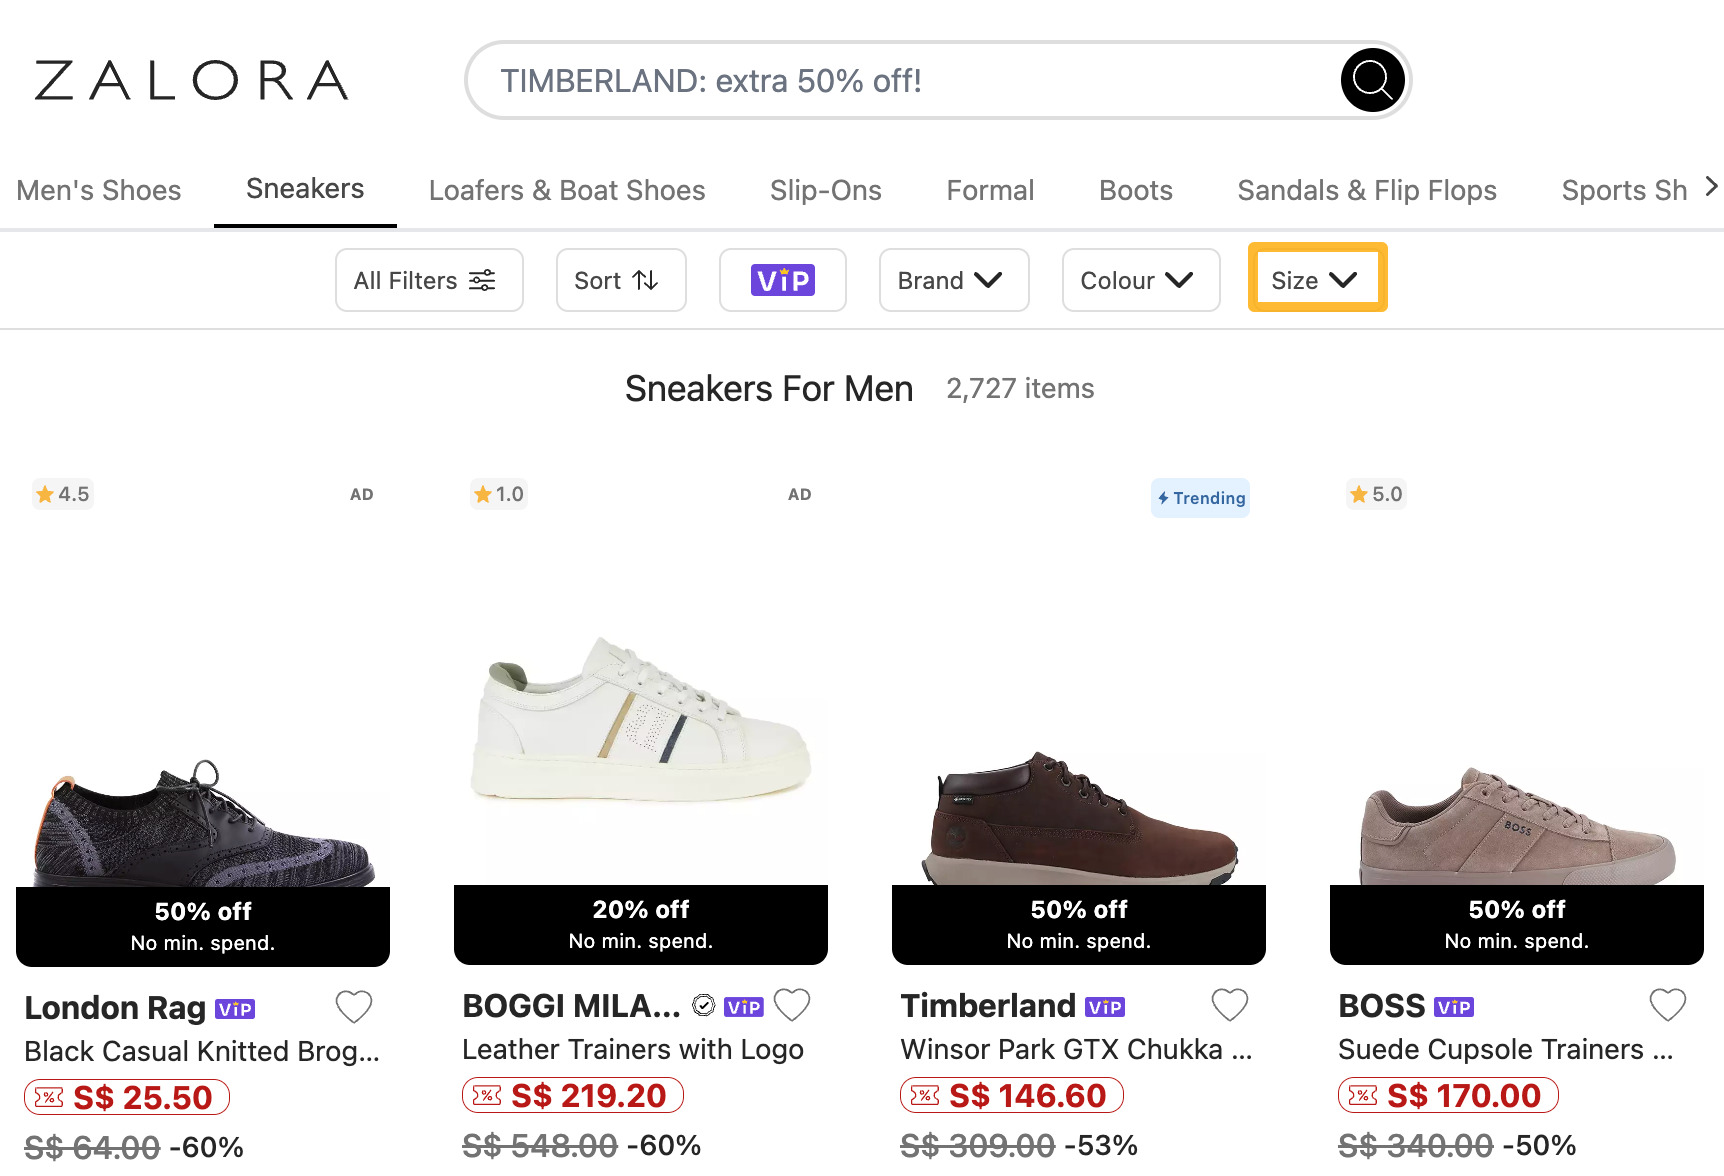 Zalora has a size filter for the men's sneakers page
